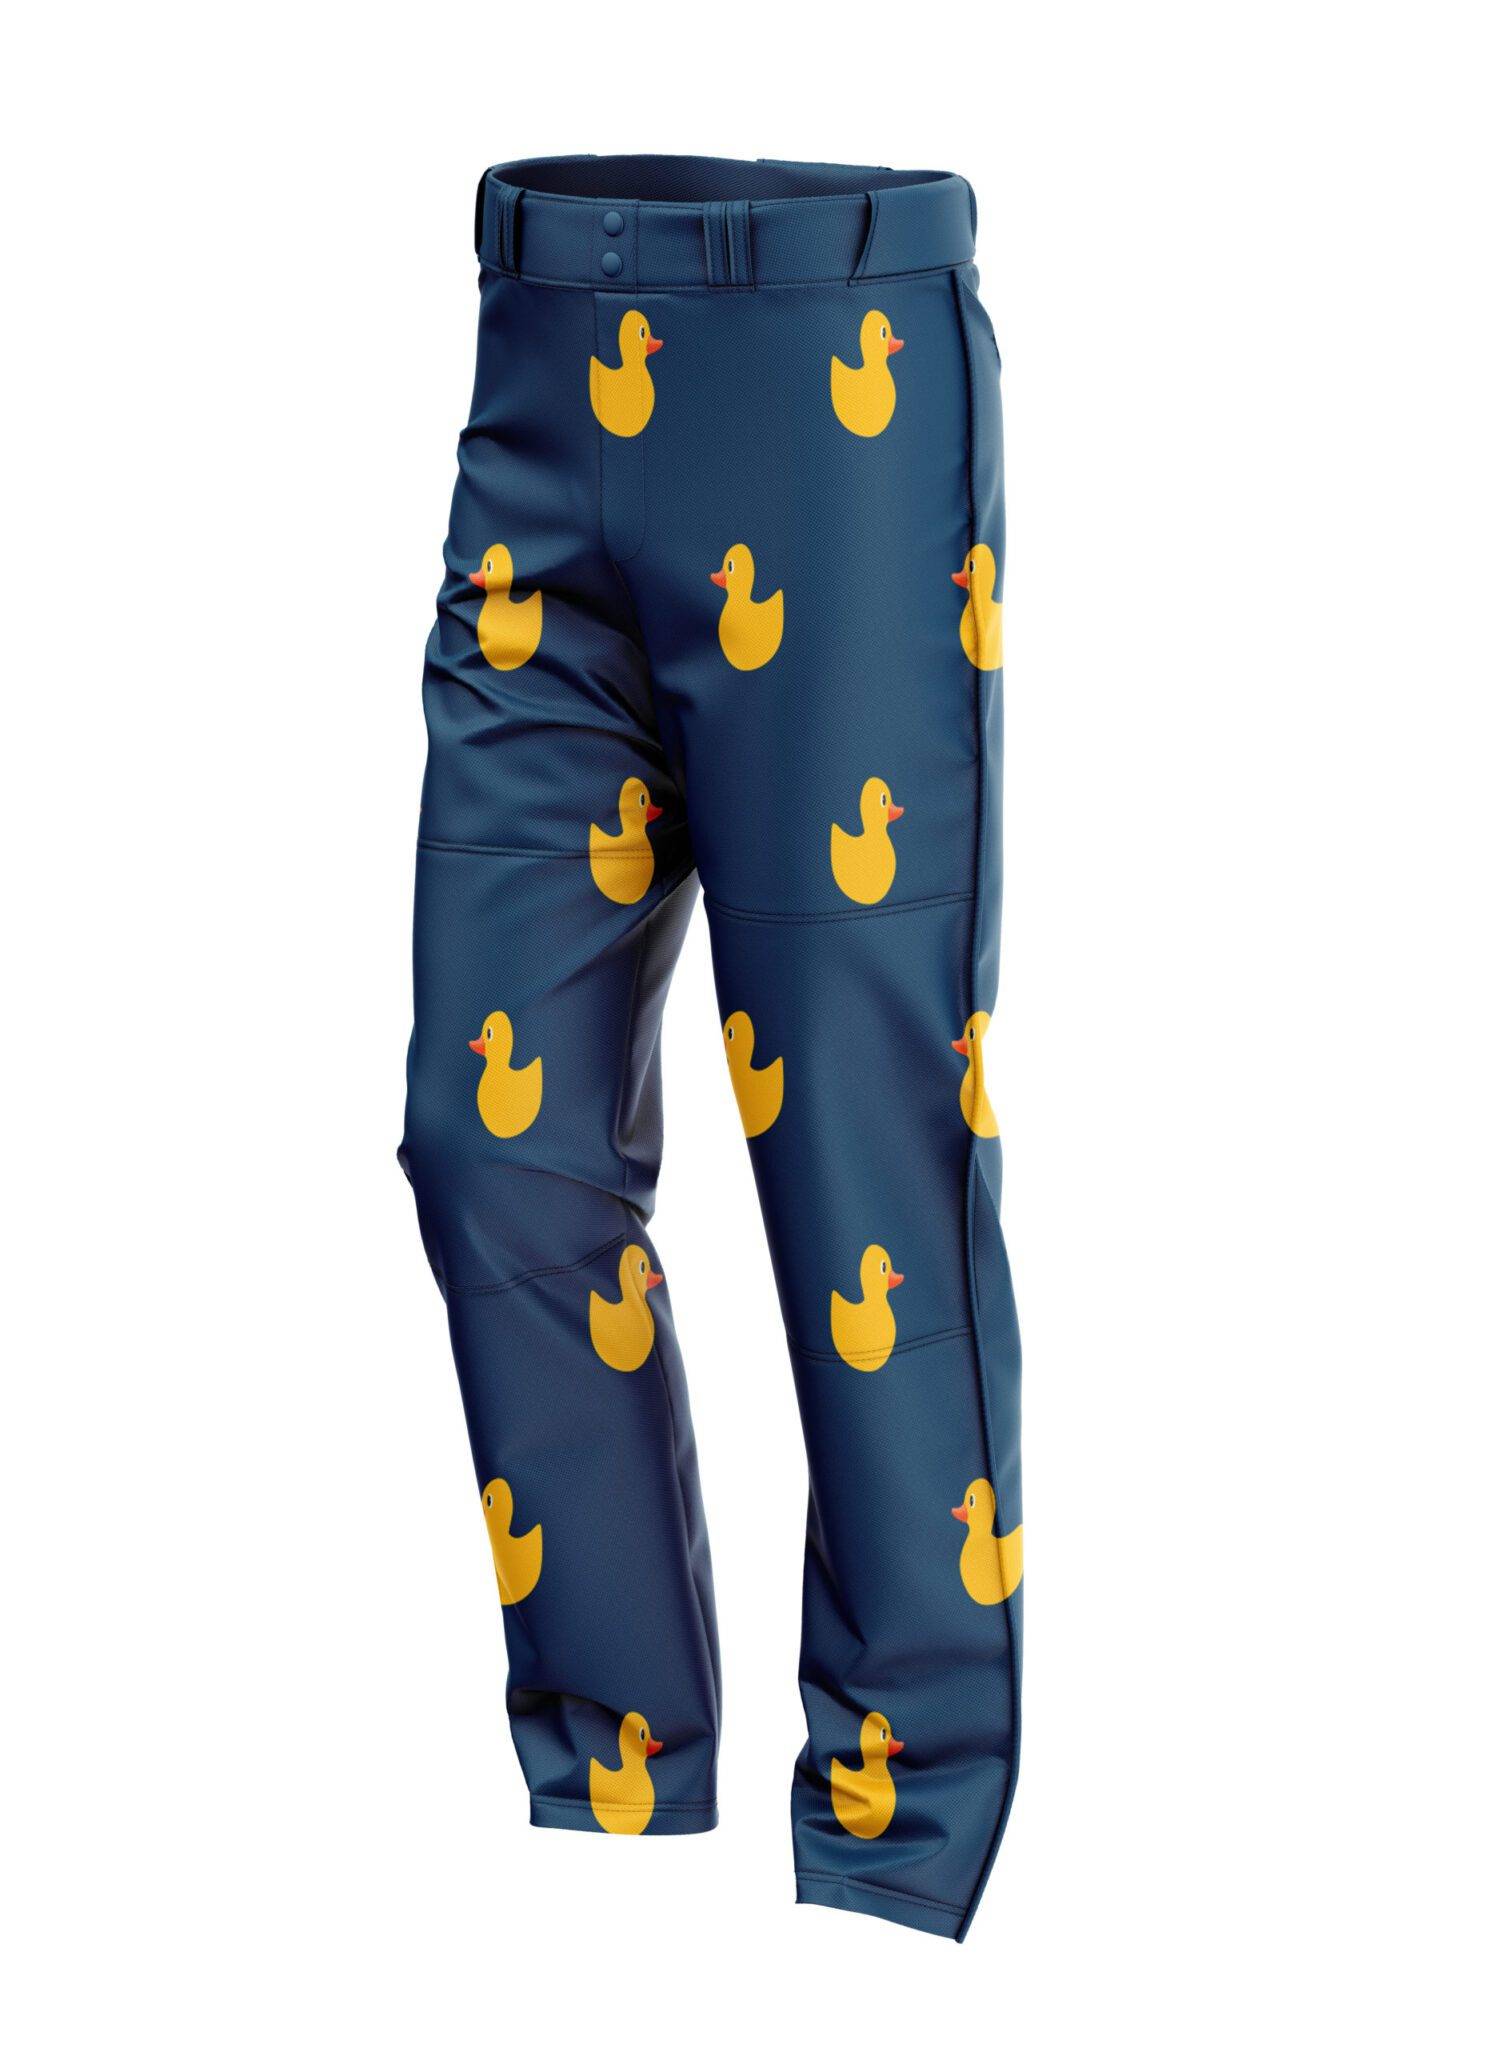 Rubber Duck CoolWick Bowling Pants - Coolwick Bowling Apparel